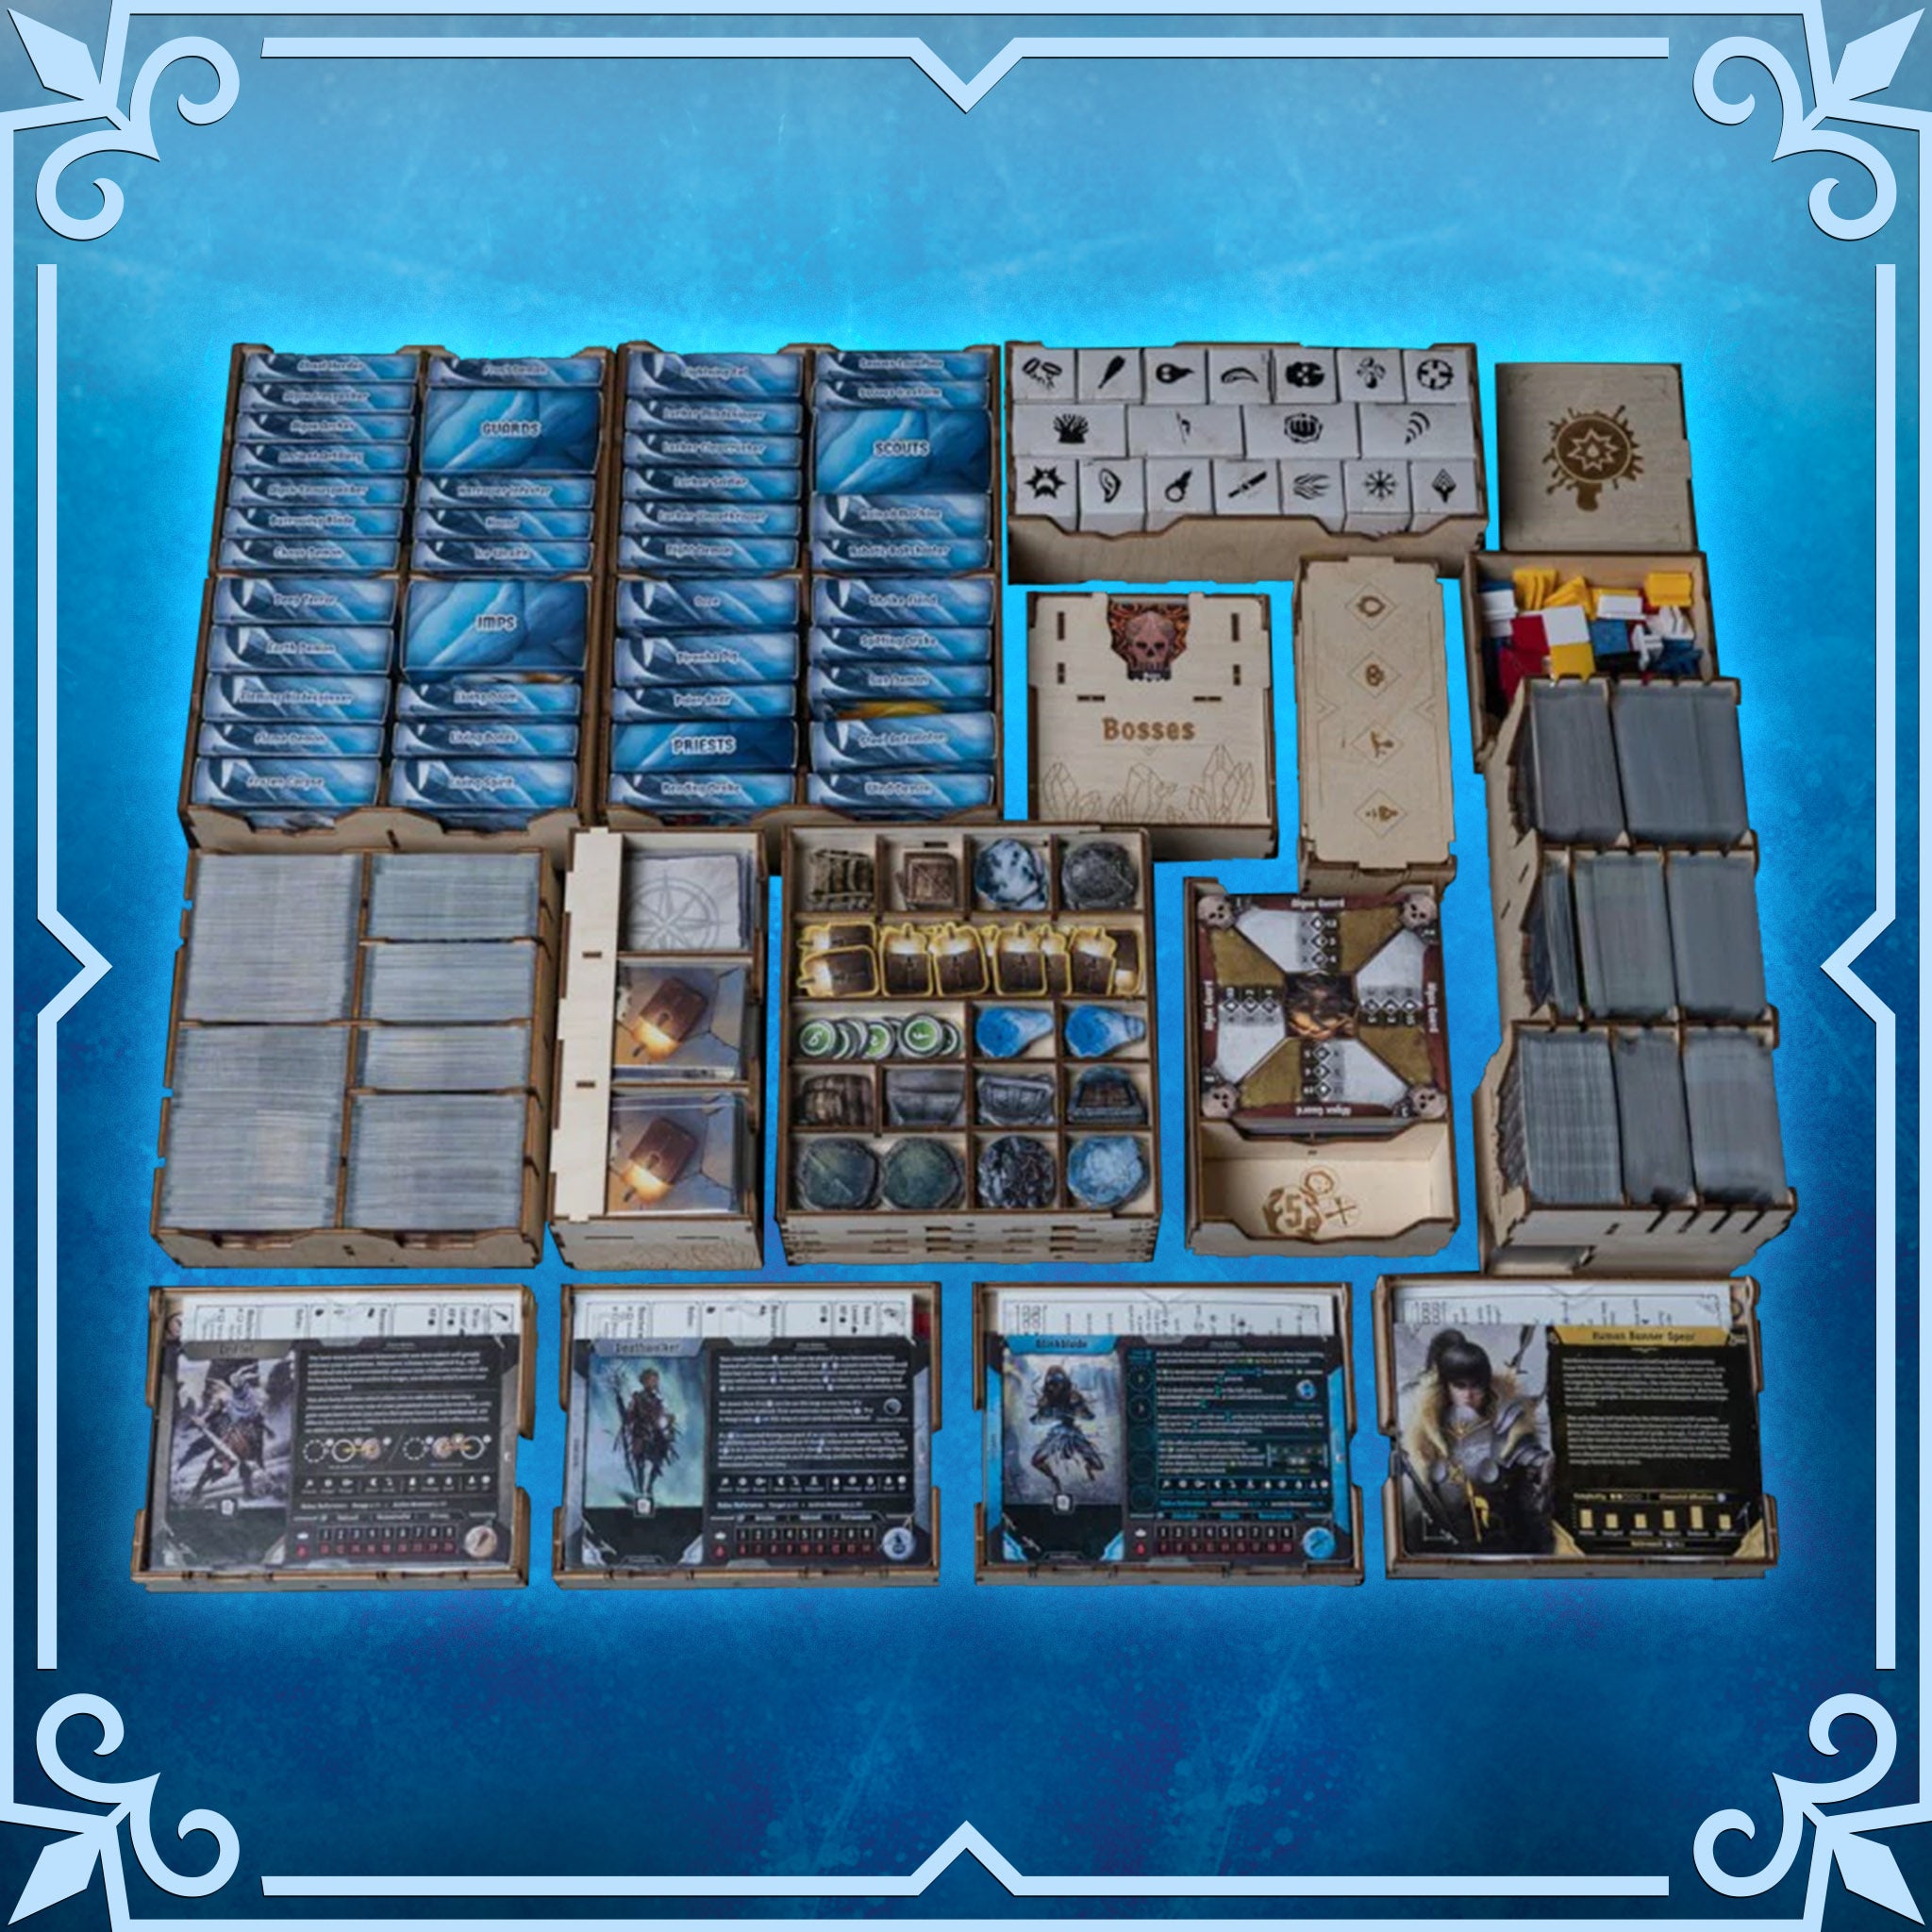 Frosthaven Board Game Organizer with Inserts